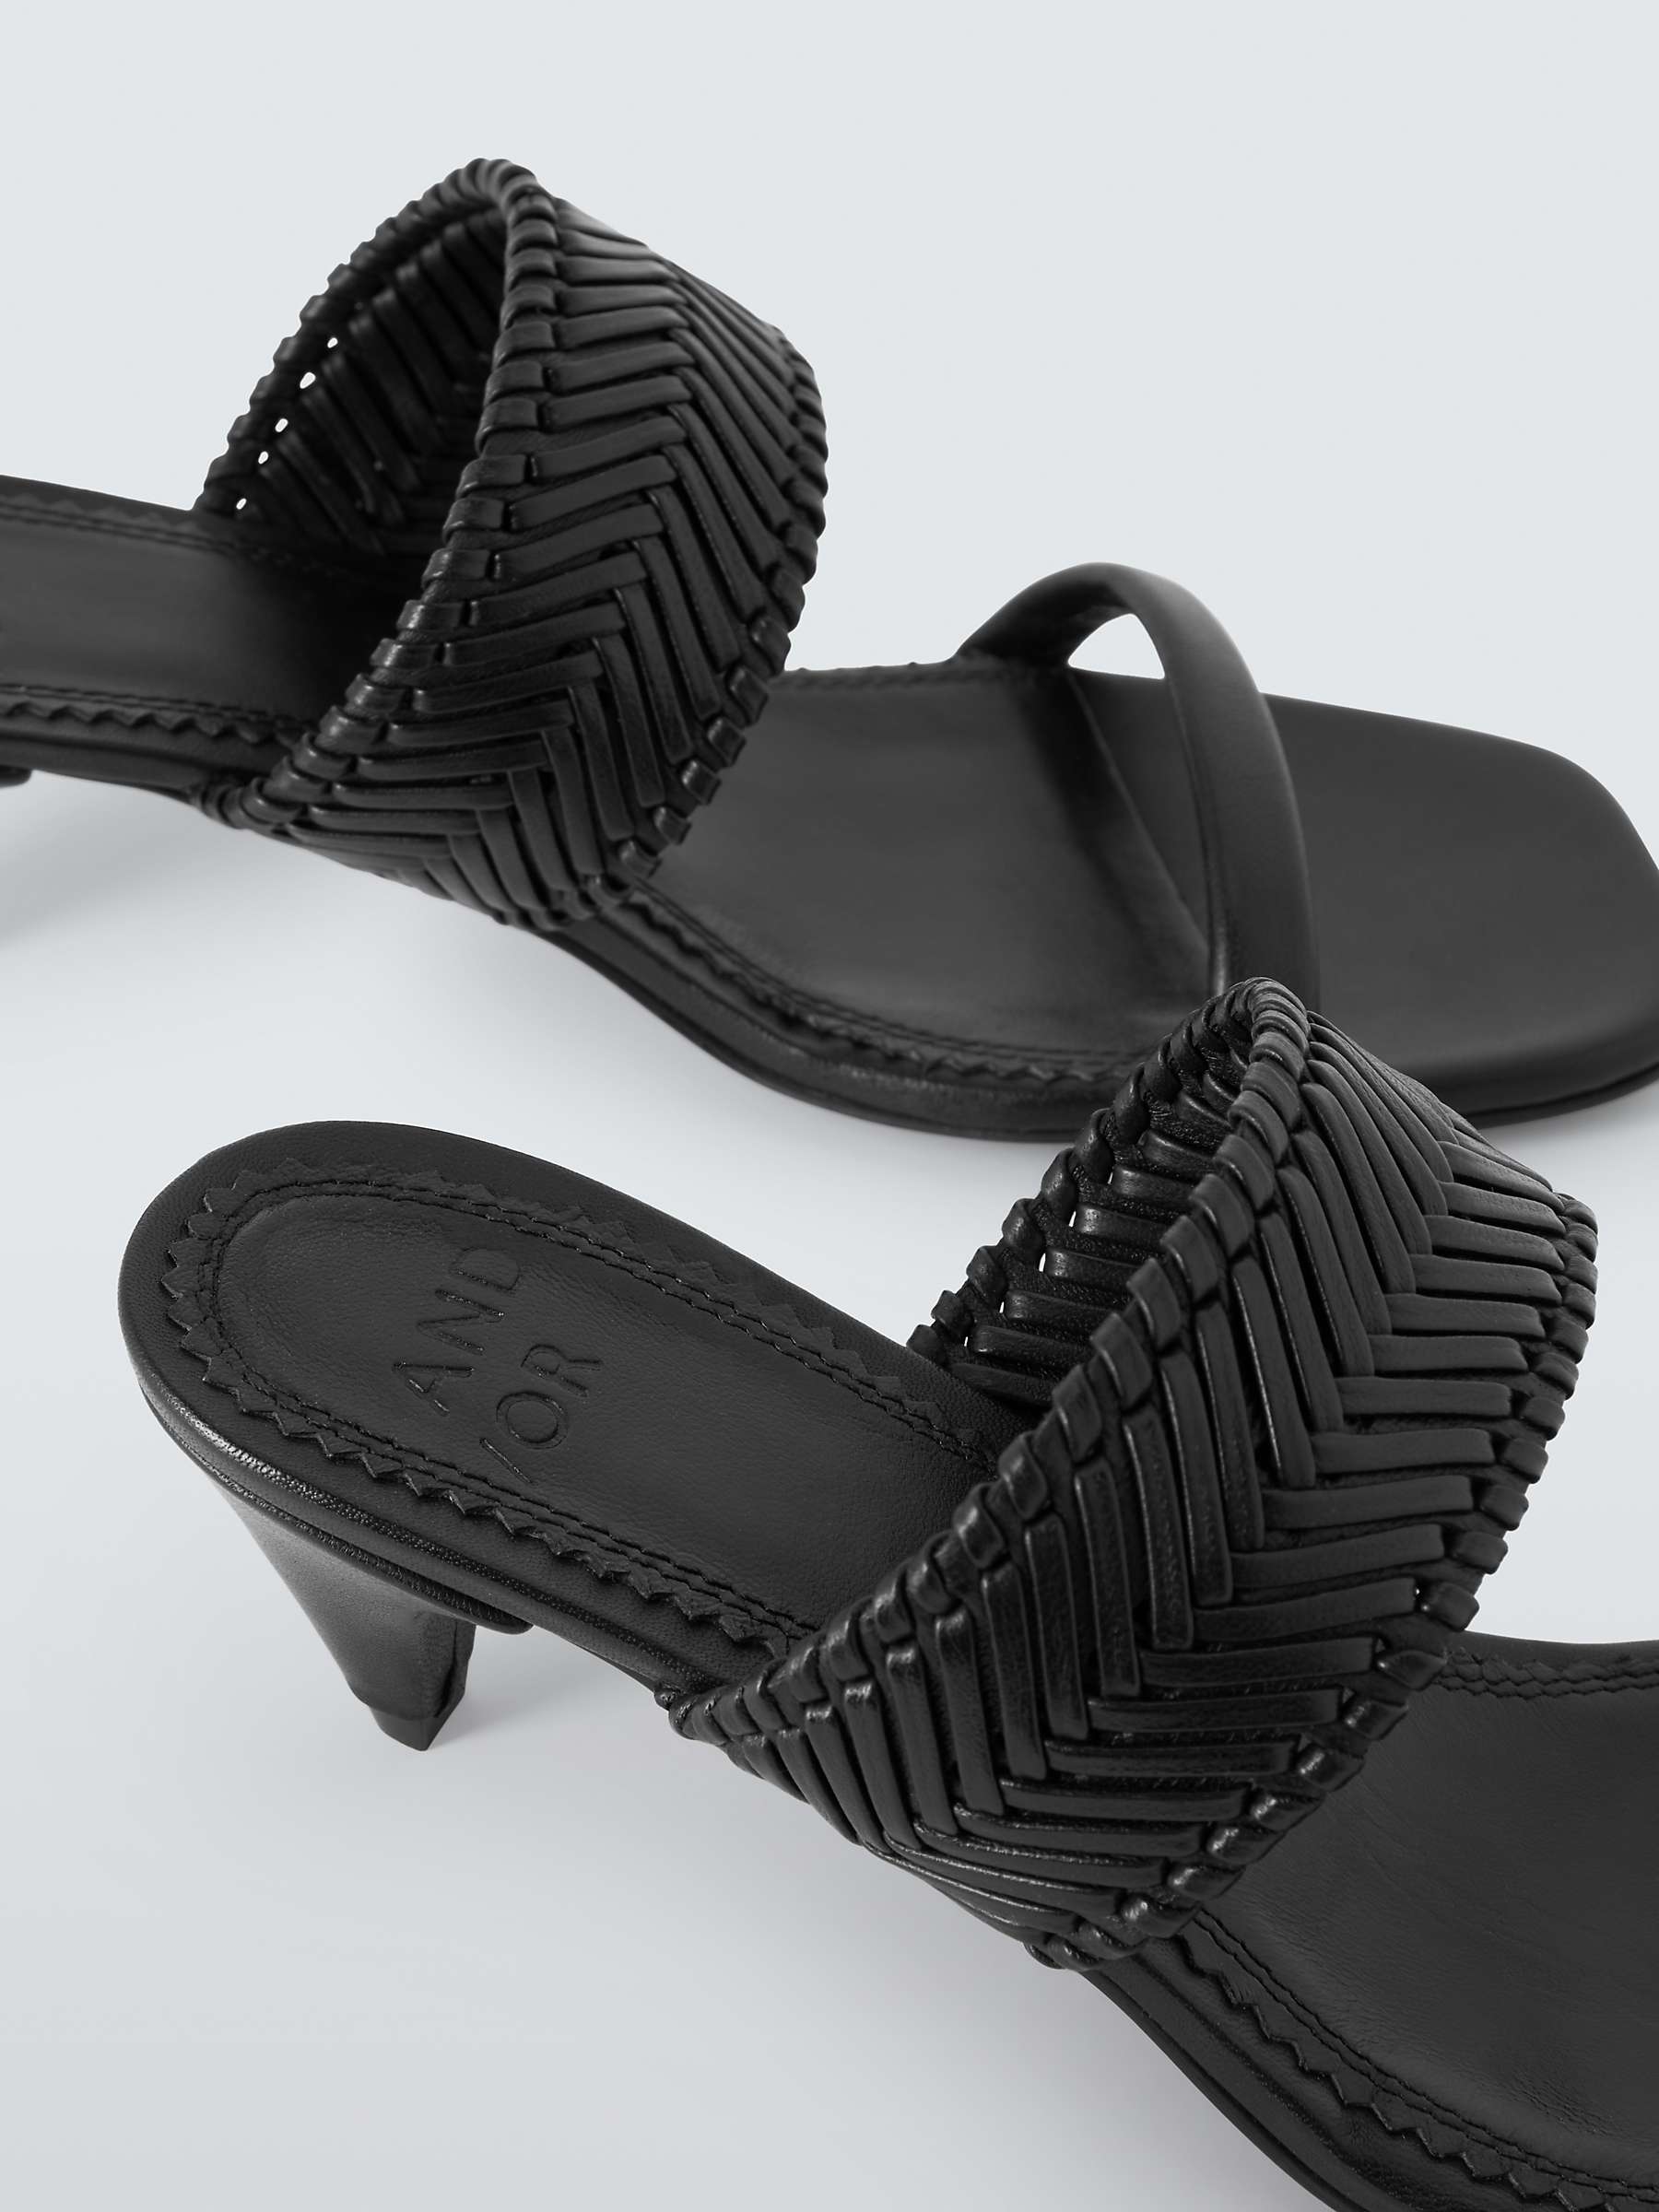 Buy AND/OR Irealea Leather Feature Heel Woven Mule Sandals Online at johnlewis.com